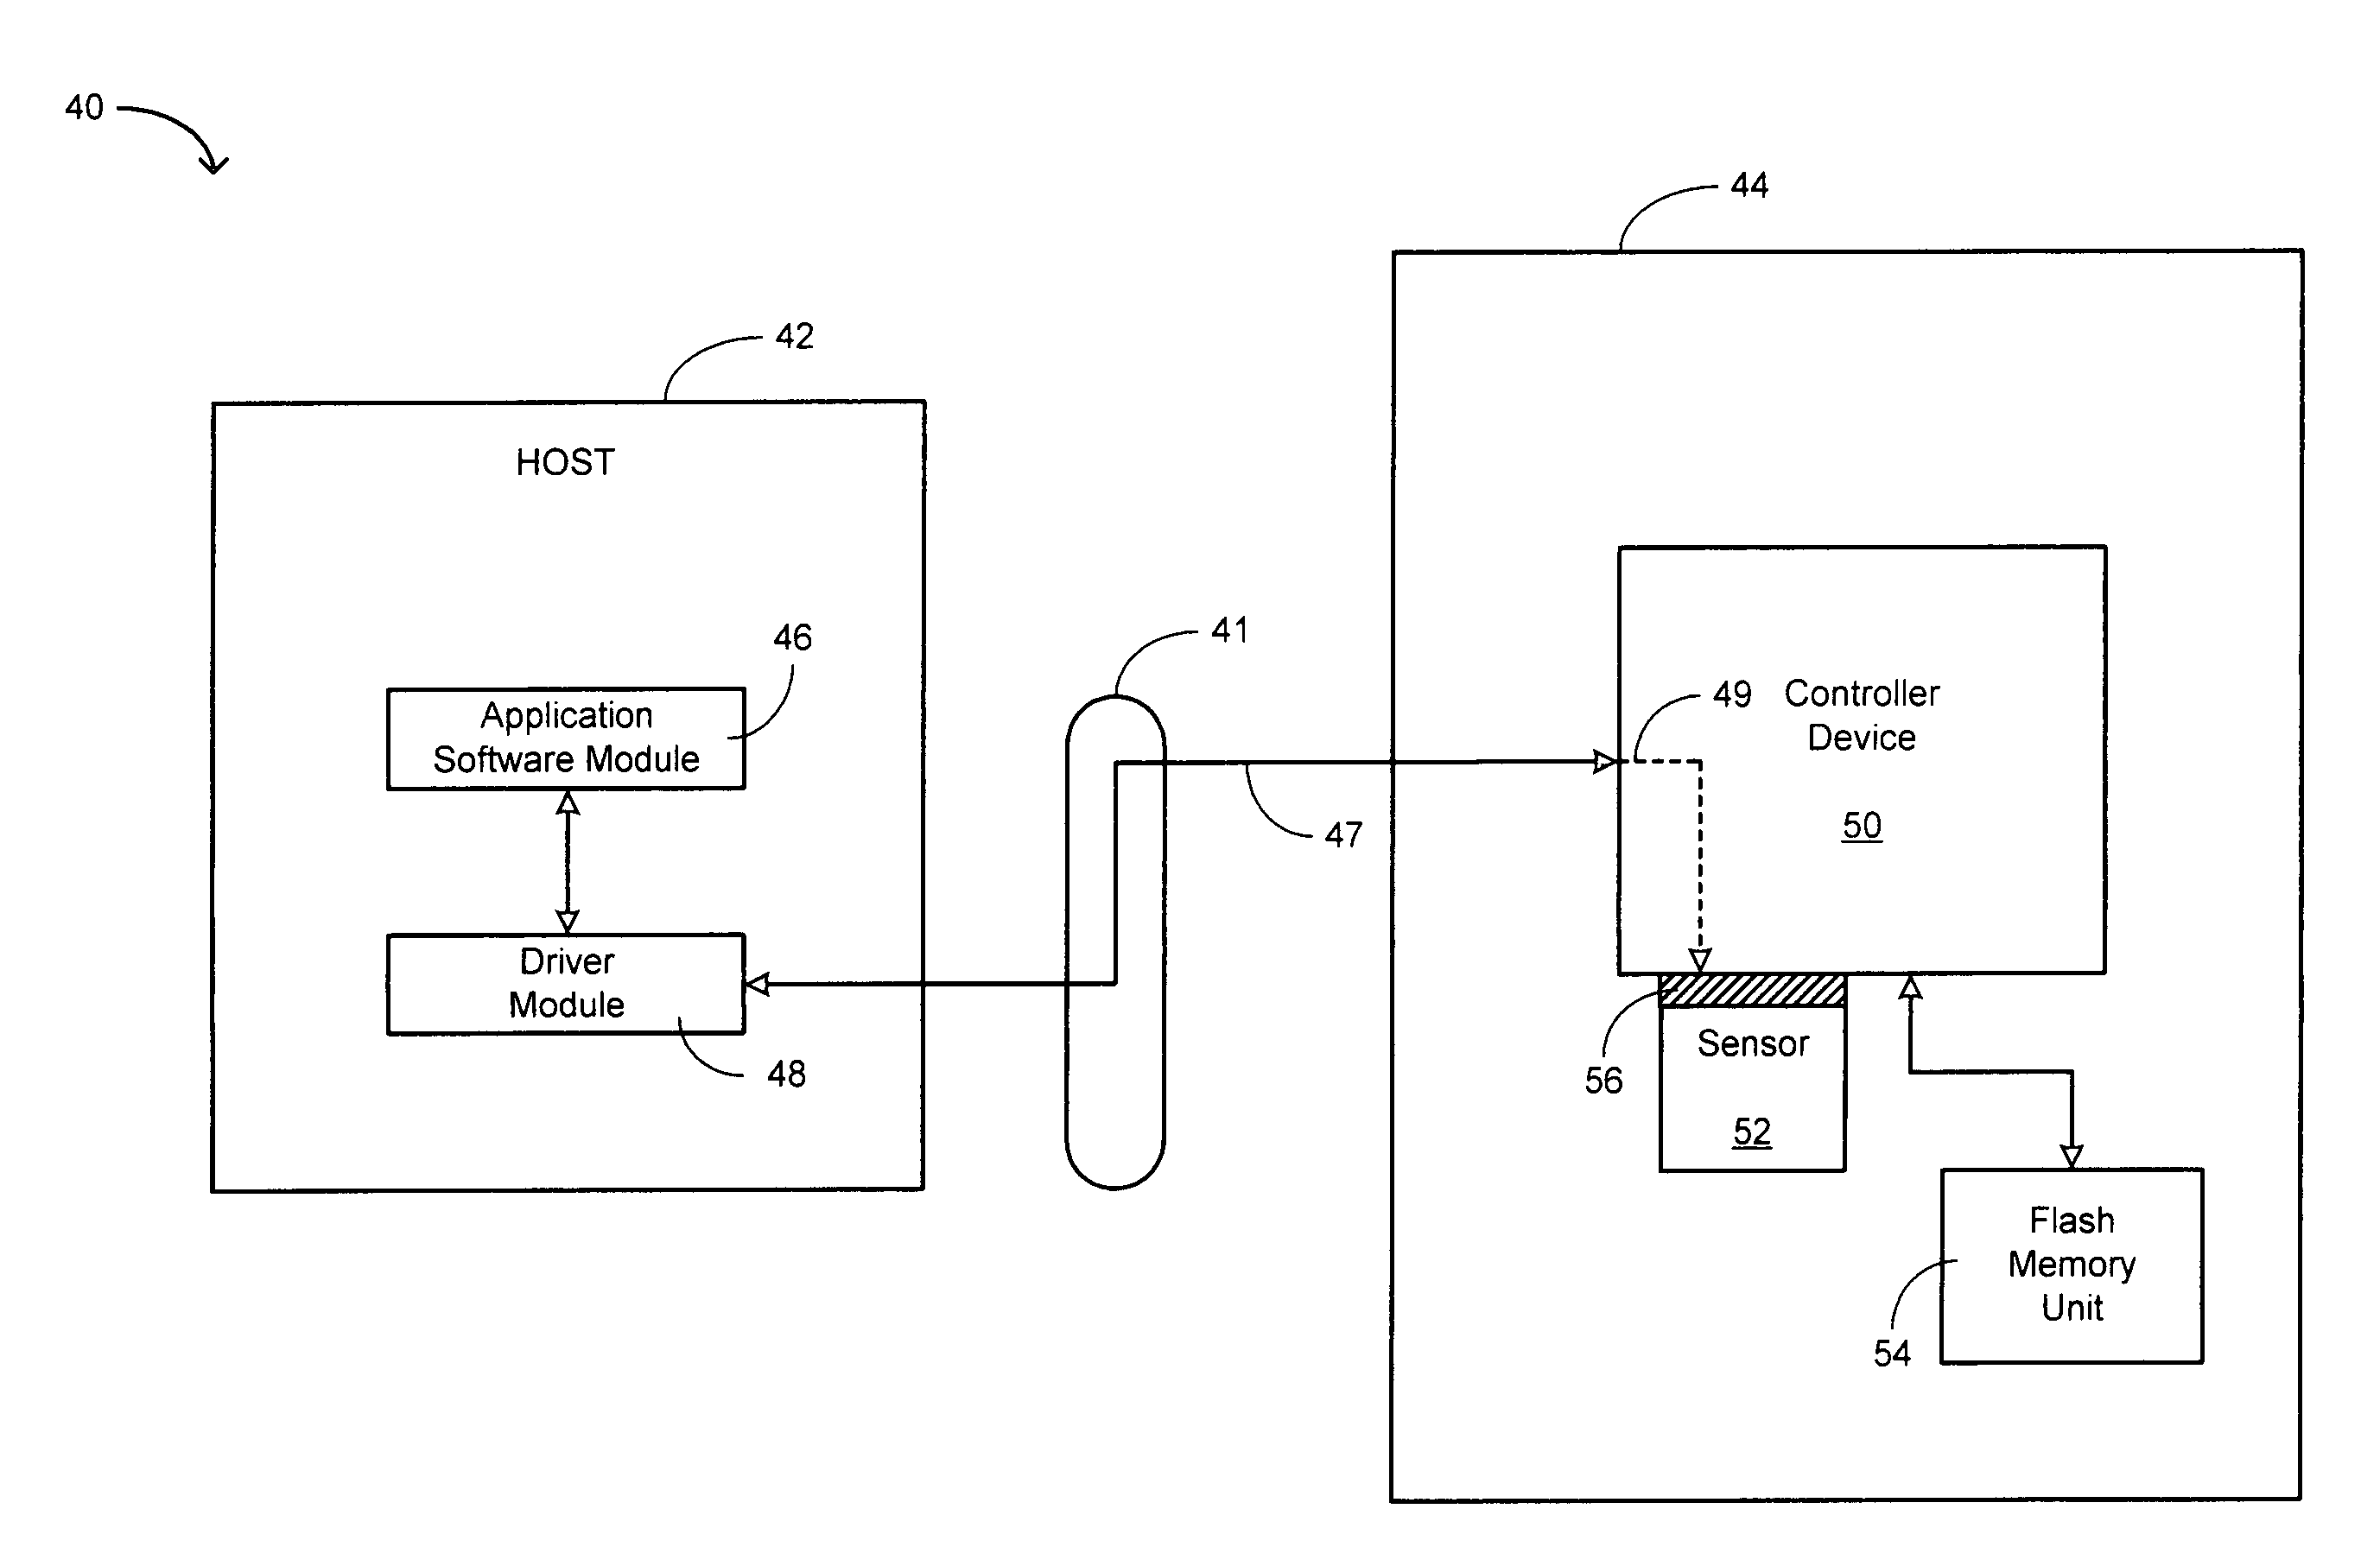 Direct secondary device interface by a host